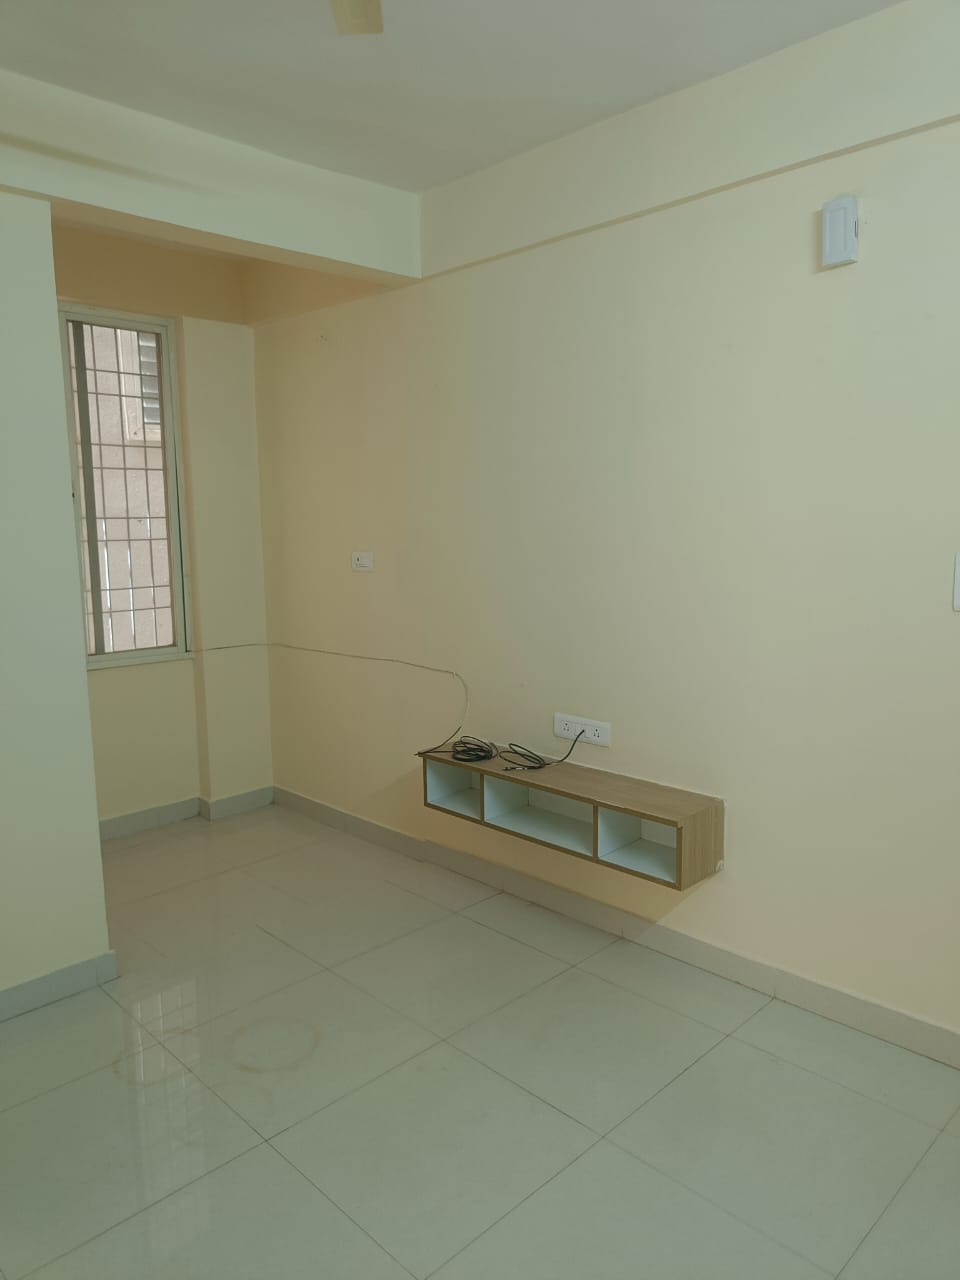 1 BHK Residential Apartment for Lease Only at JAML2 - 2033 in Challakere